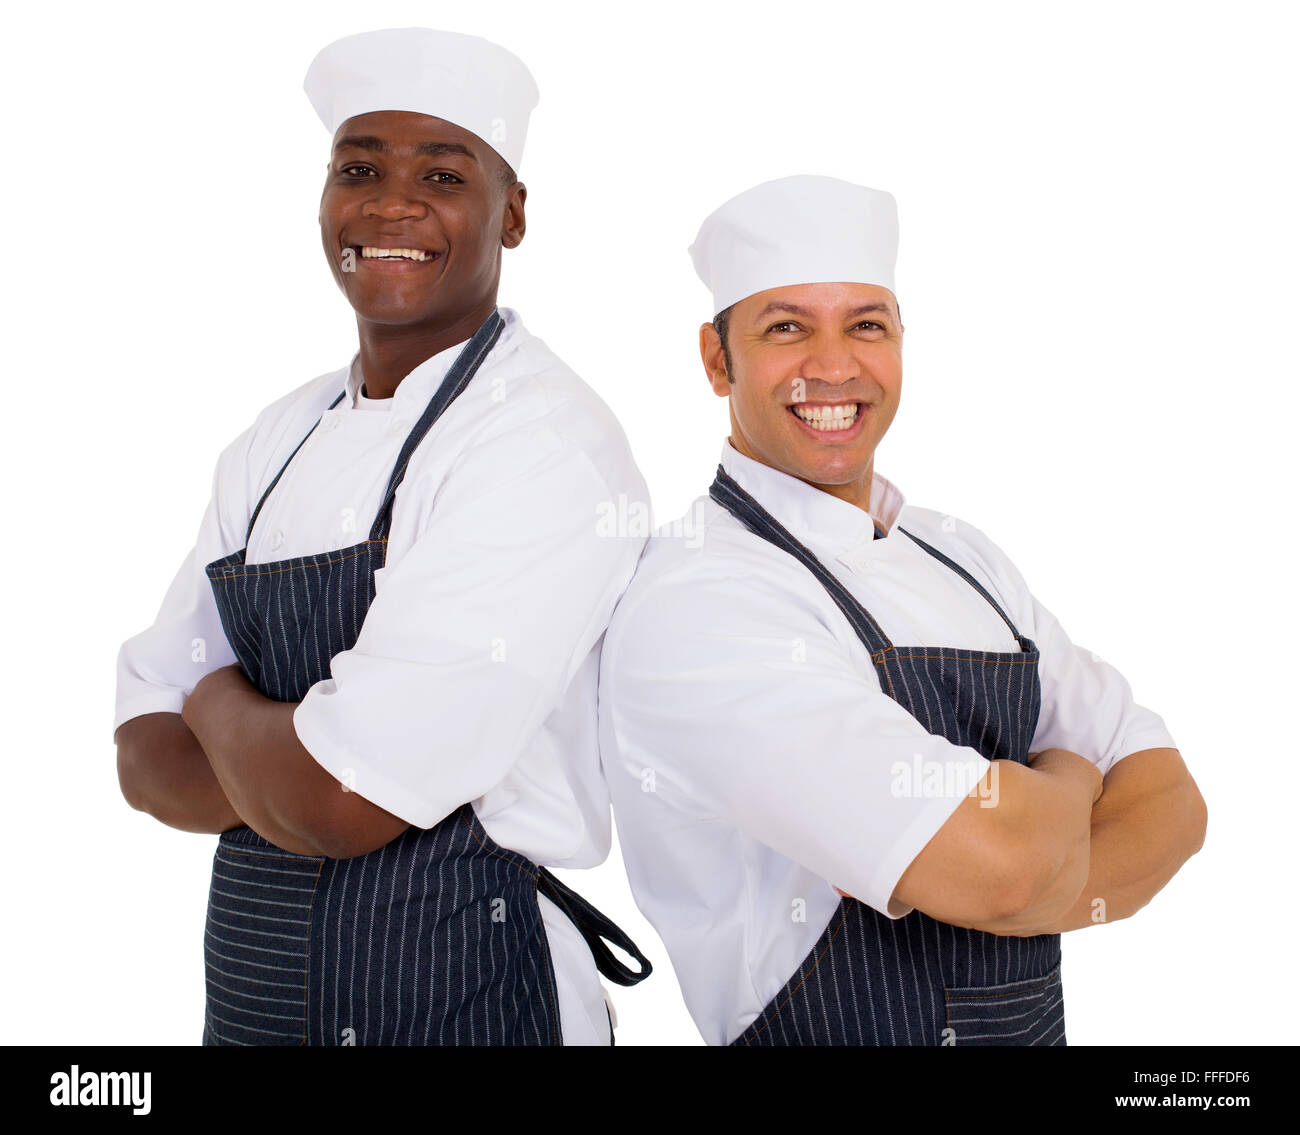 portrait of cheerful restaurant chefs arms crossed Stock Photo